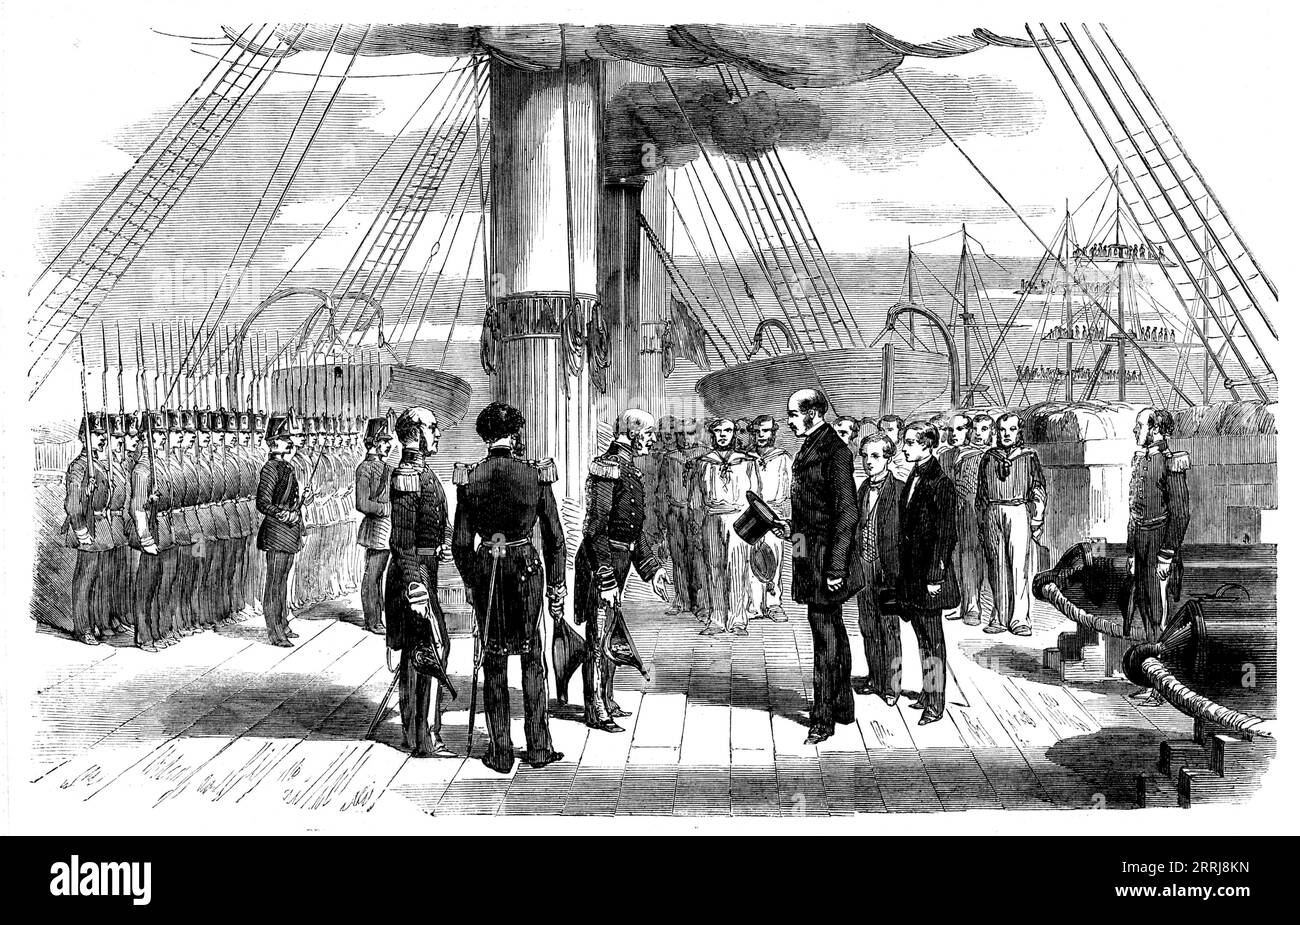 The Embarkation of Prince Alfred on board the &quot;Euryalus&quot; on Wednesday week - from a sketch by V. Jones, 1858. Naval cadet Alfred, accompanied by his father Prince Albert, is introduced to the (Royal Navy) service and makes his first voyage to sea. 'On approaching the Euryalus that ship manned yards, as did Rear-Admiral t'Hooft's Dutch squadron, and a grand general salute followed. Prince Albert and Prince Alfred were received by Captain Tarleton and the full staff of the ship with all the honours due to Royalty, and entertained by him at luncheon in the state cabin...The young Prince Stock Photo